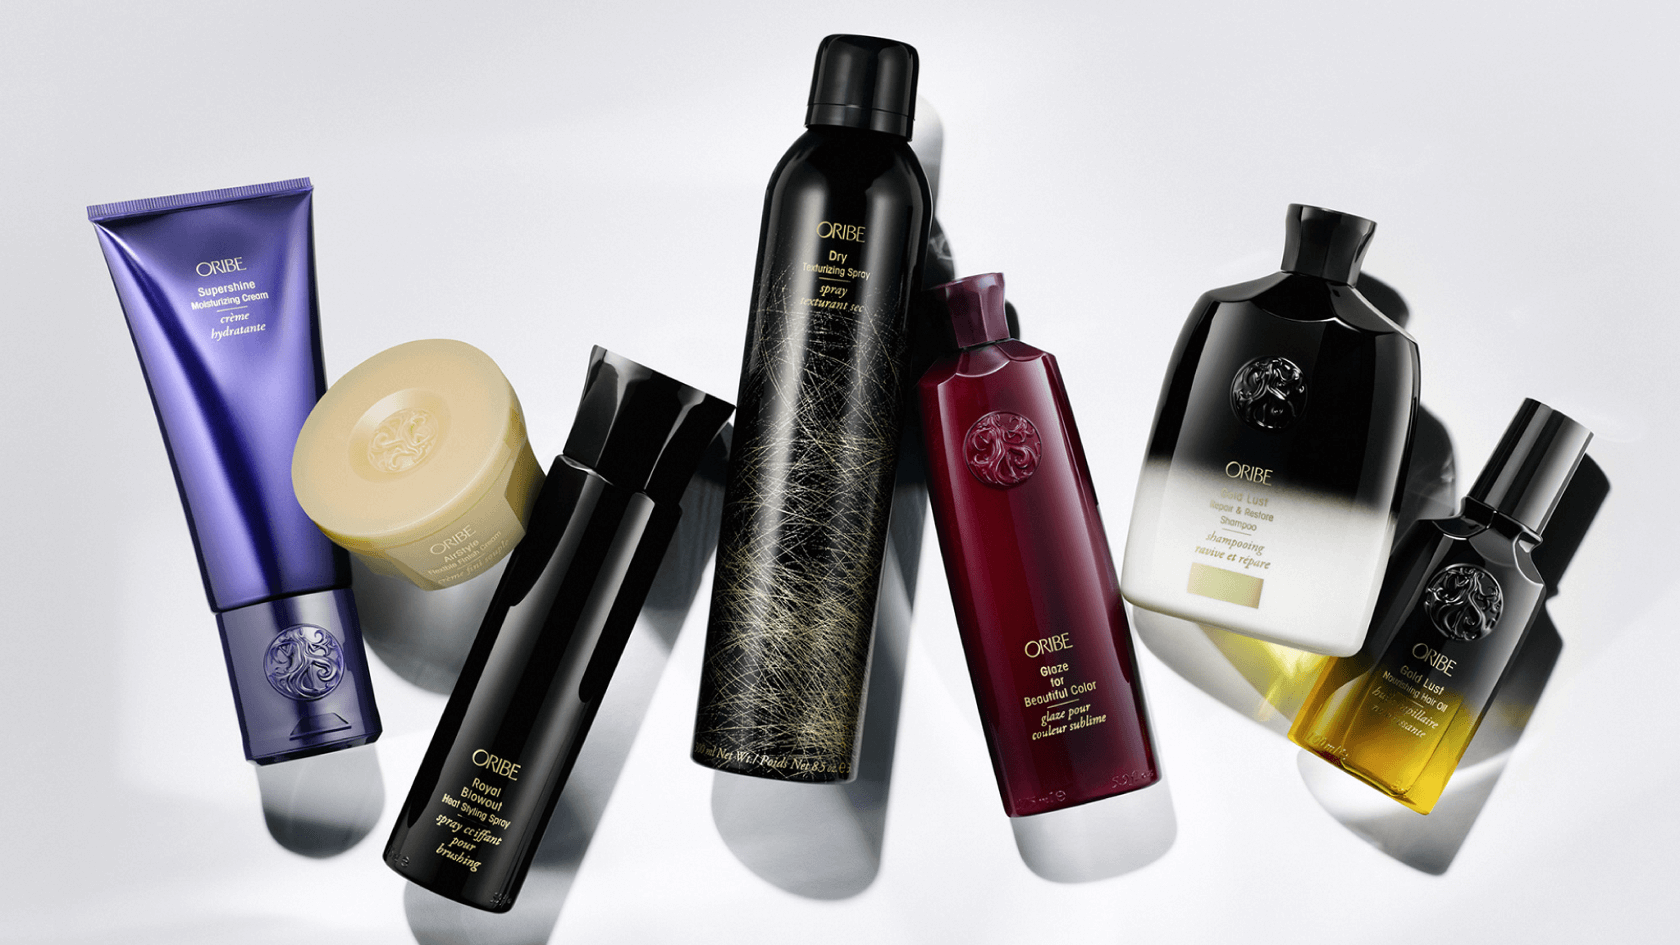 Oribe Review: Is Oribe Worth Buying Given the High Price Tag?